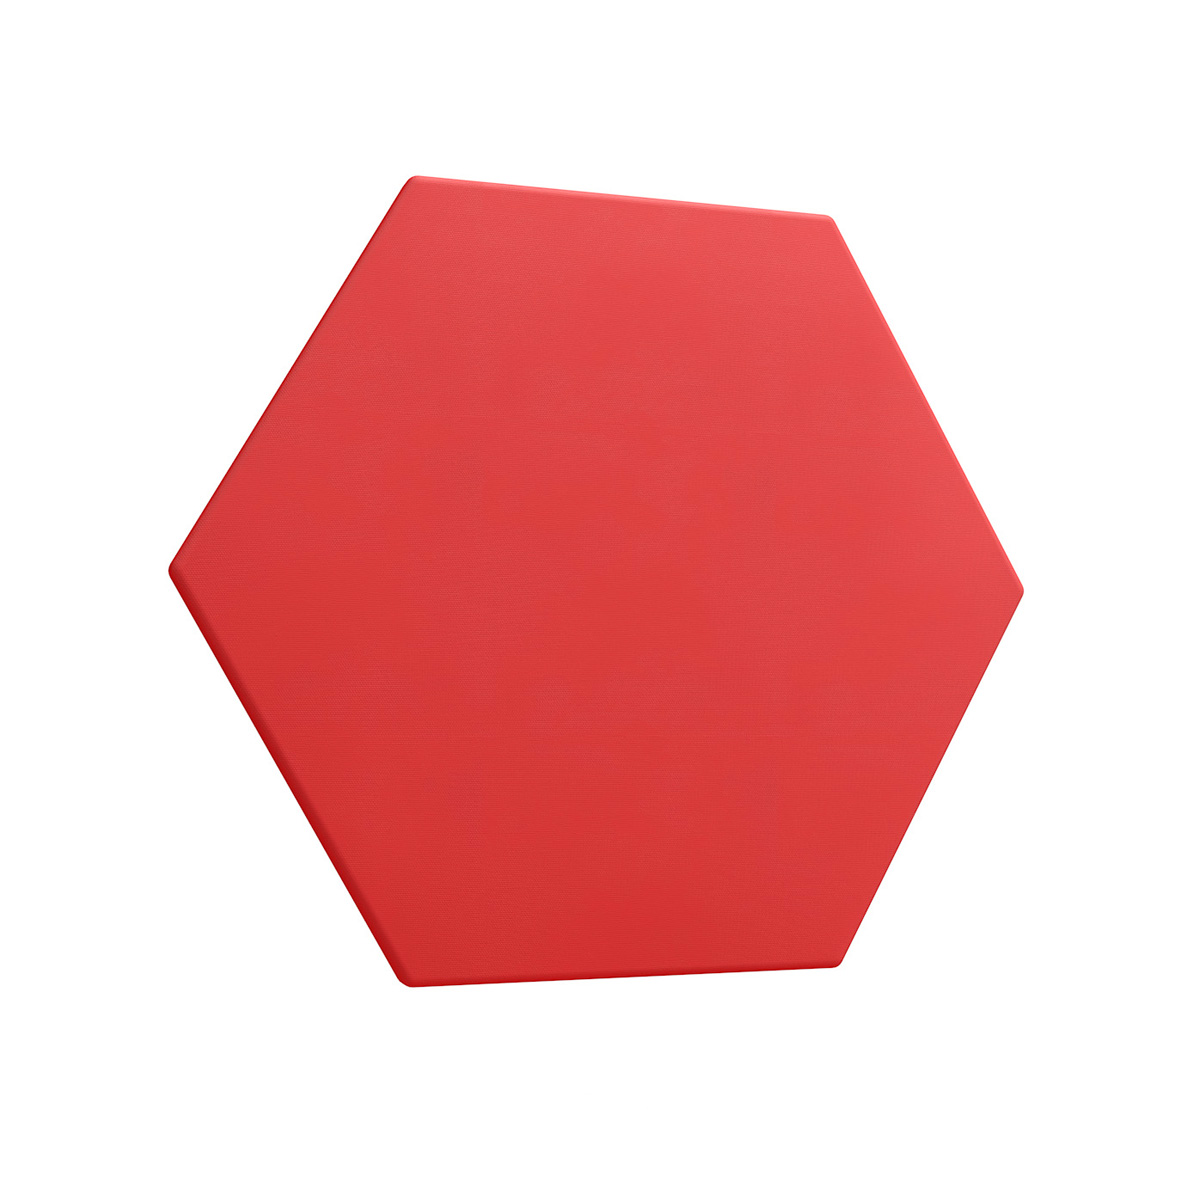 ZAGATO™ Hexagonal Acoustic Wall Tiles Are Available in Four Sizes